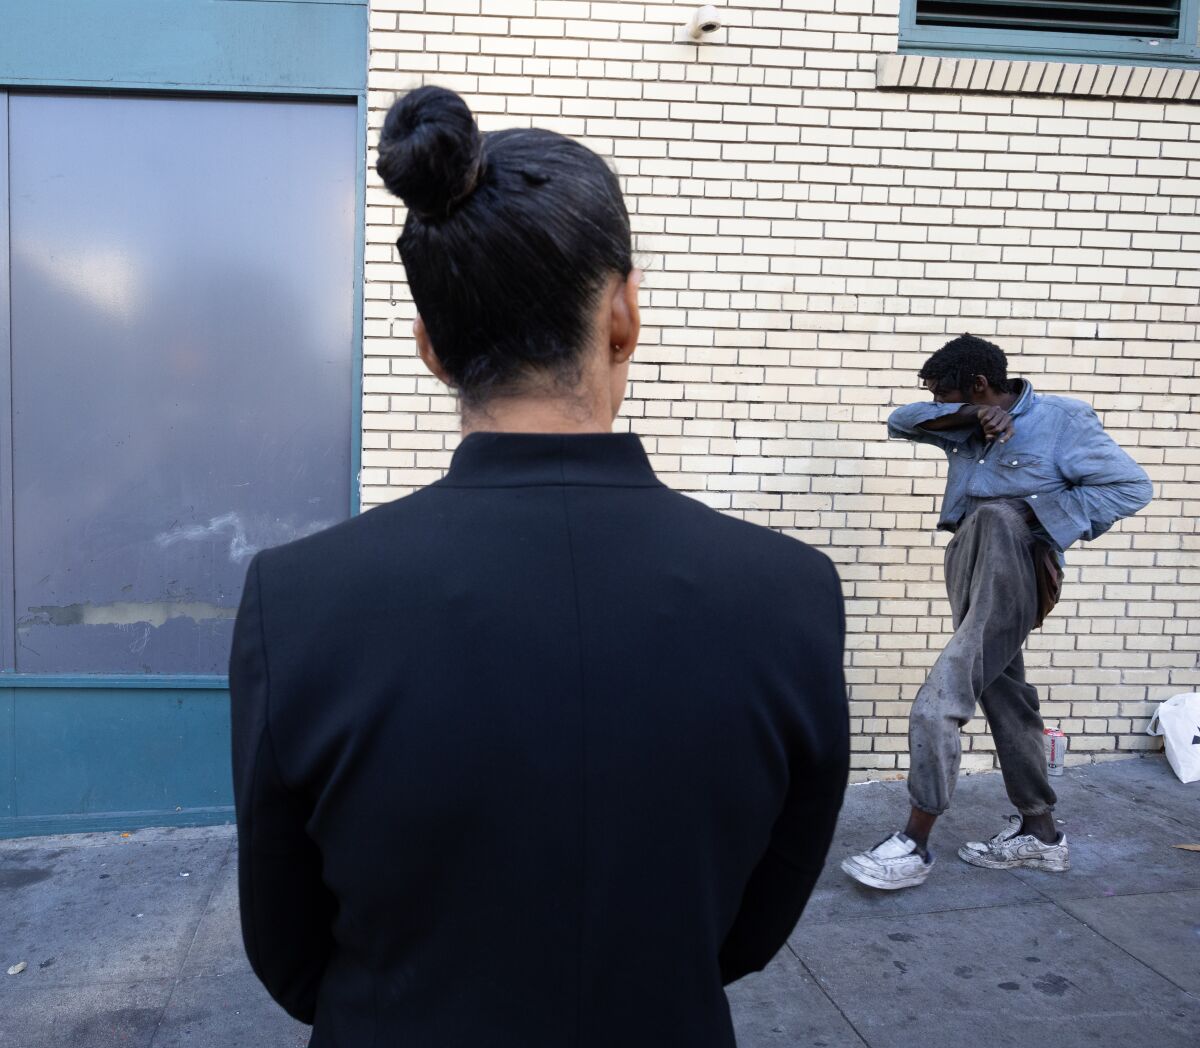 A woman with her hair in a bun observes a homeless person walking on a sidewalk